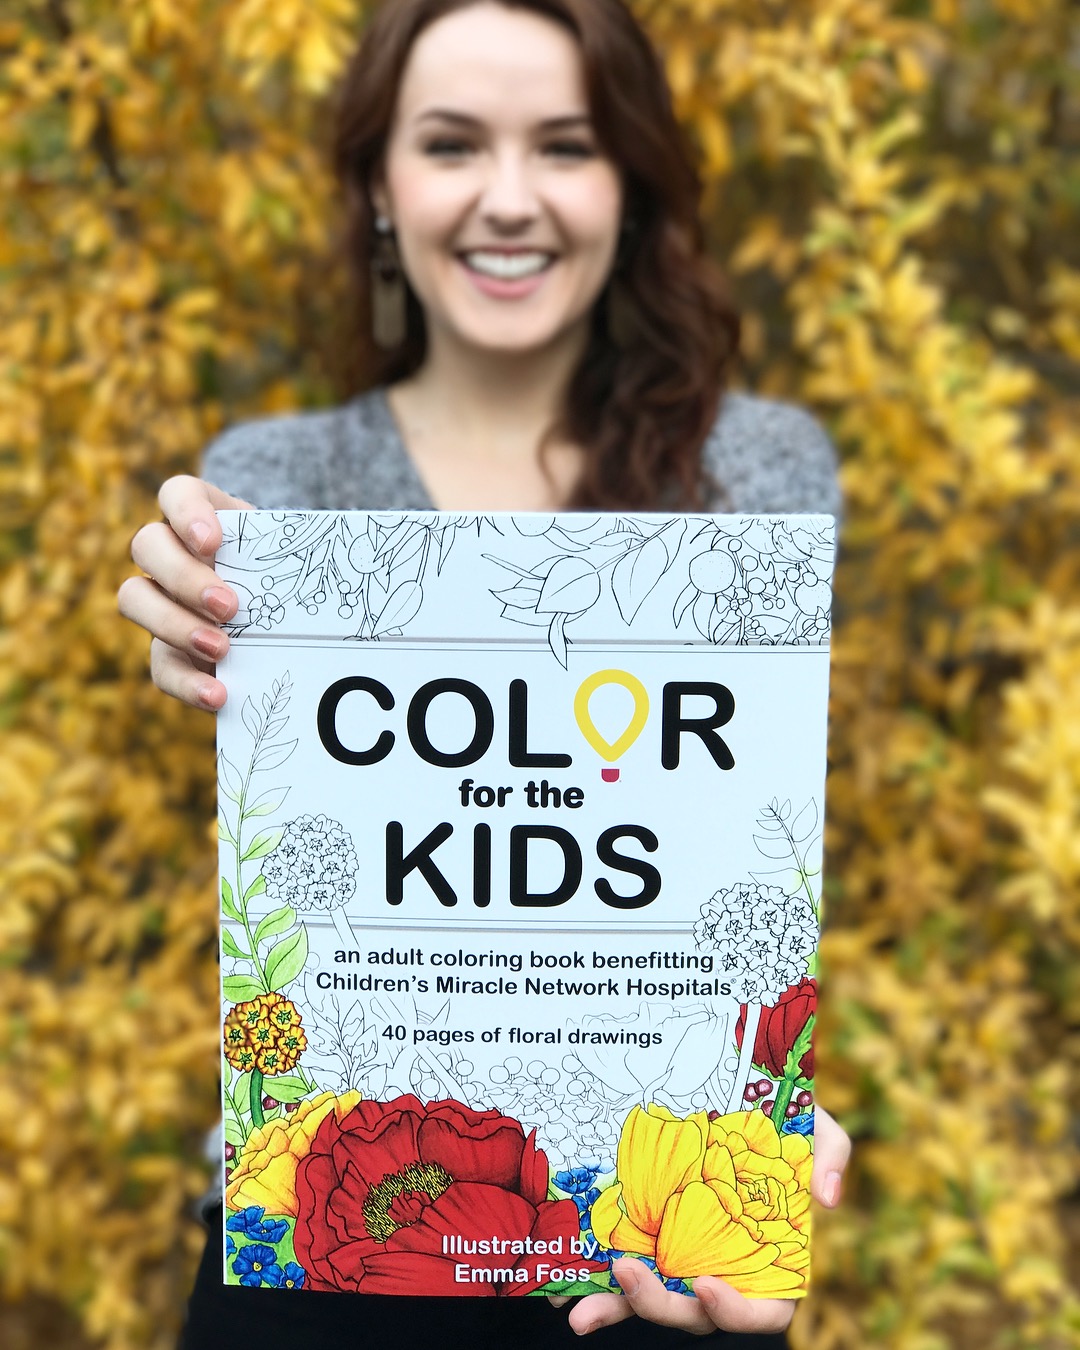 choc-childrens-volunteer-with-coloring-books-as-donation-to-choc